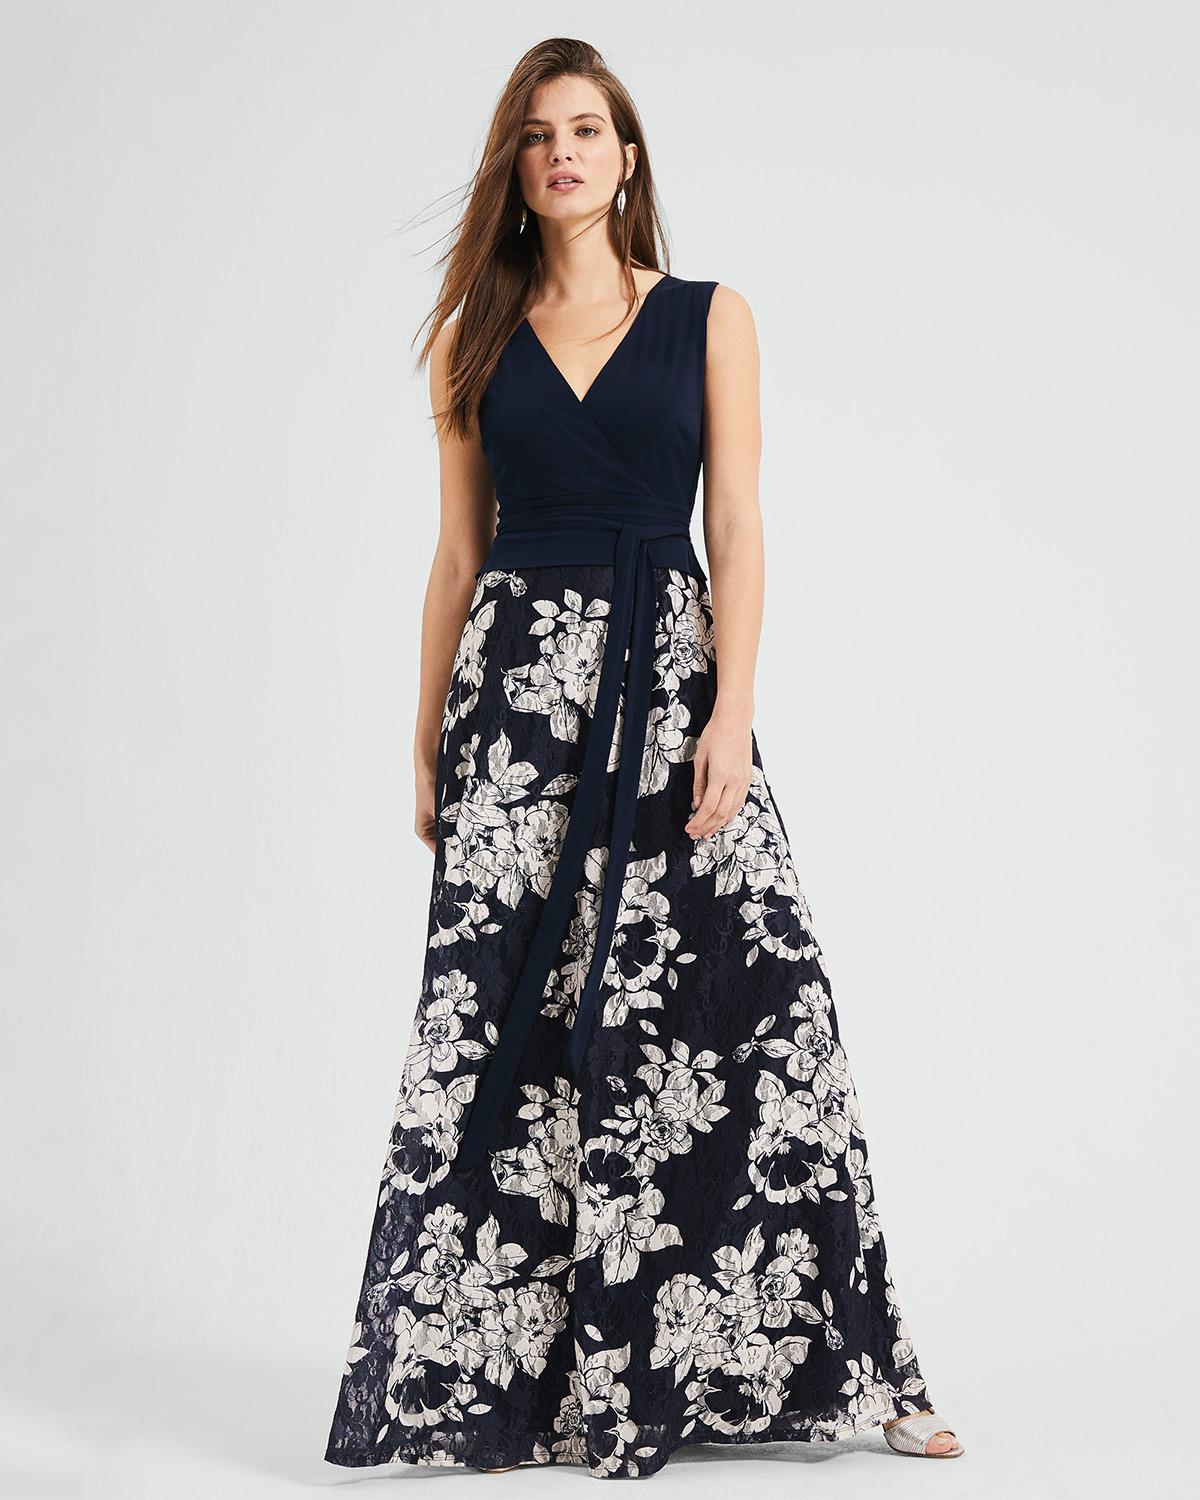 Lyst - Phase Eight Navy And Oyster Madeline Lace Skirt Maxi Dress in Blue